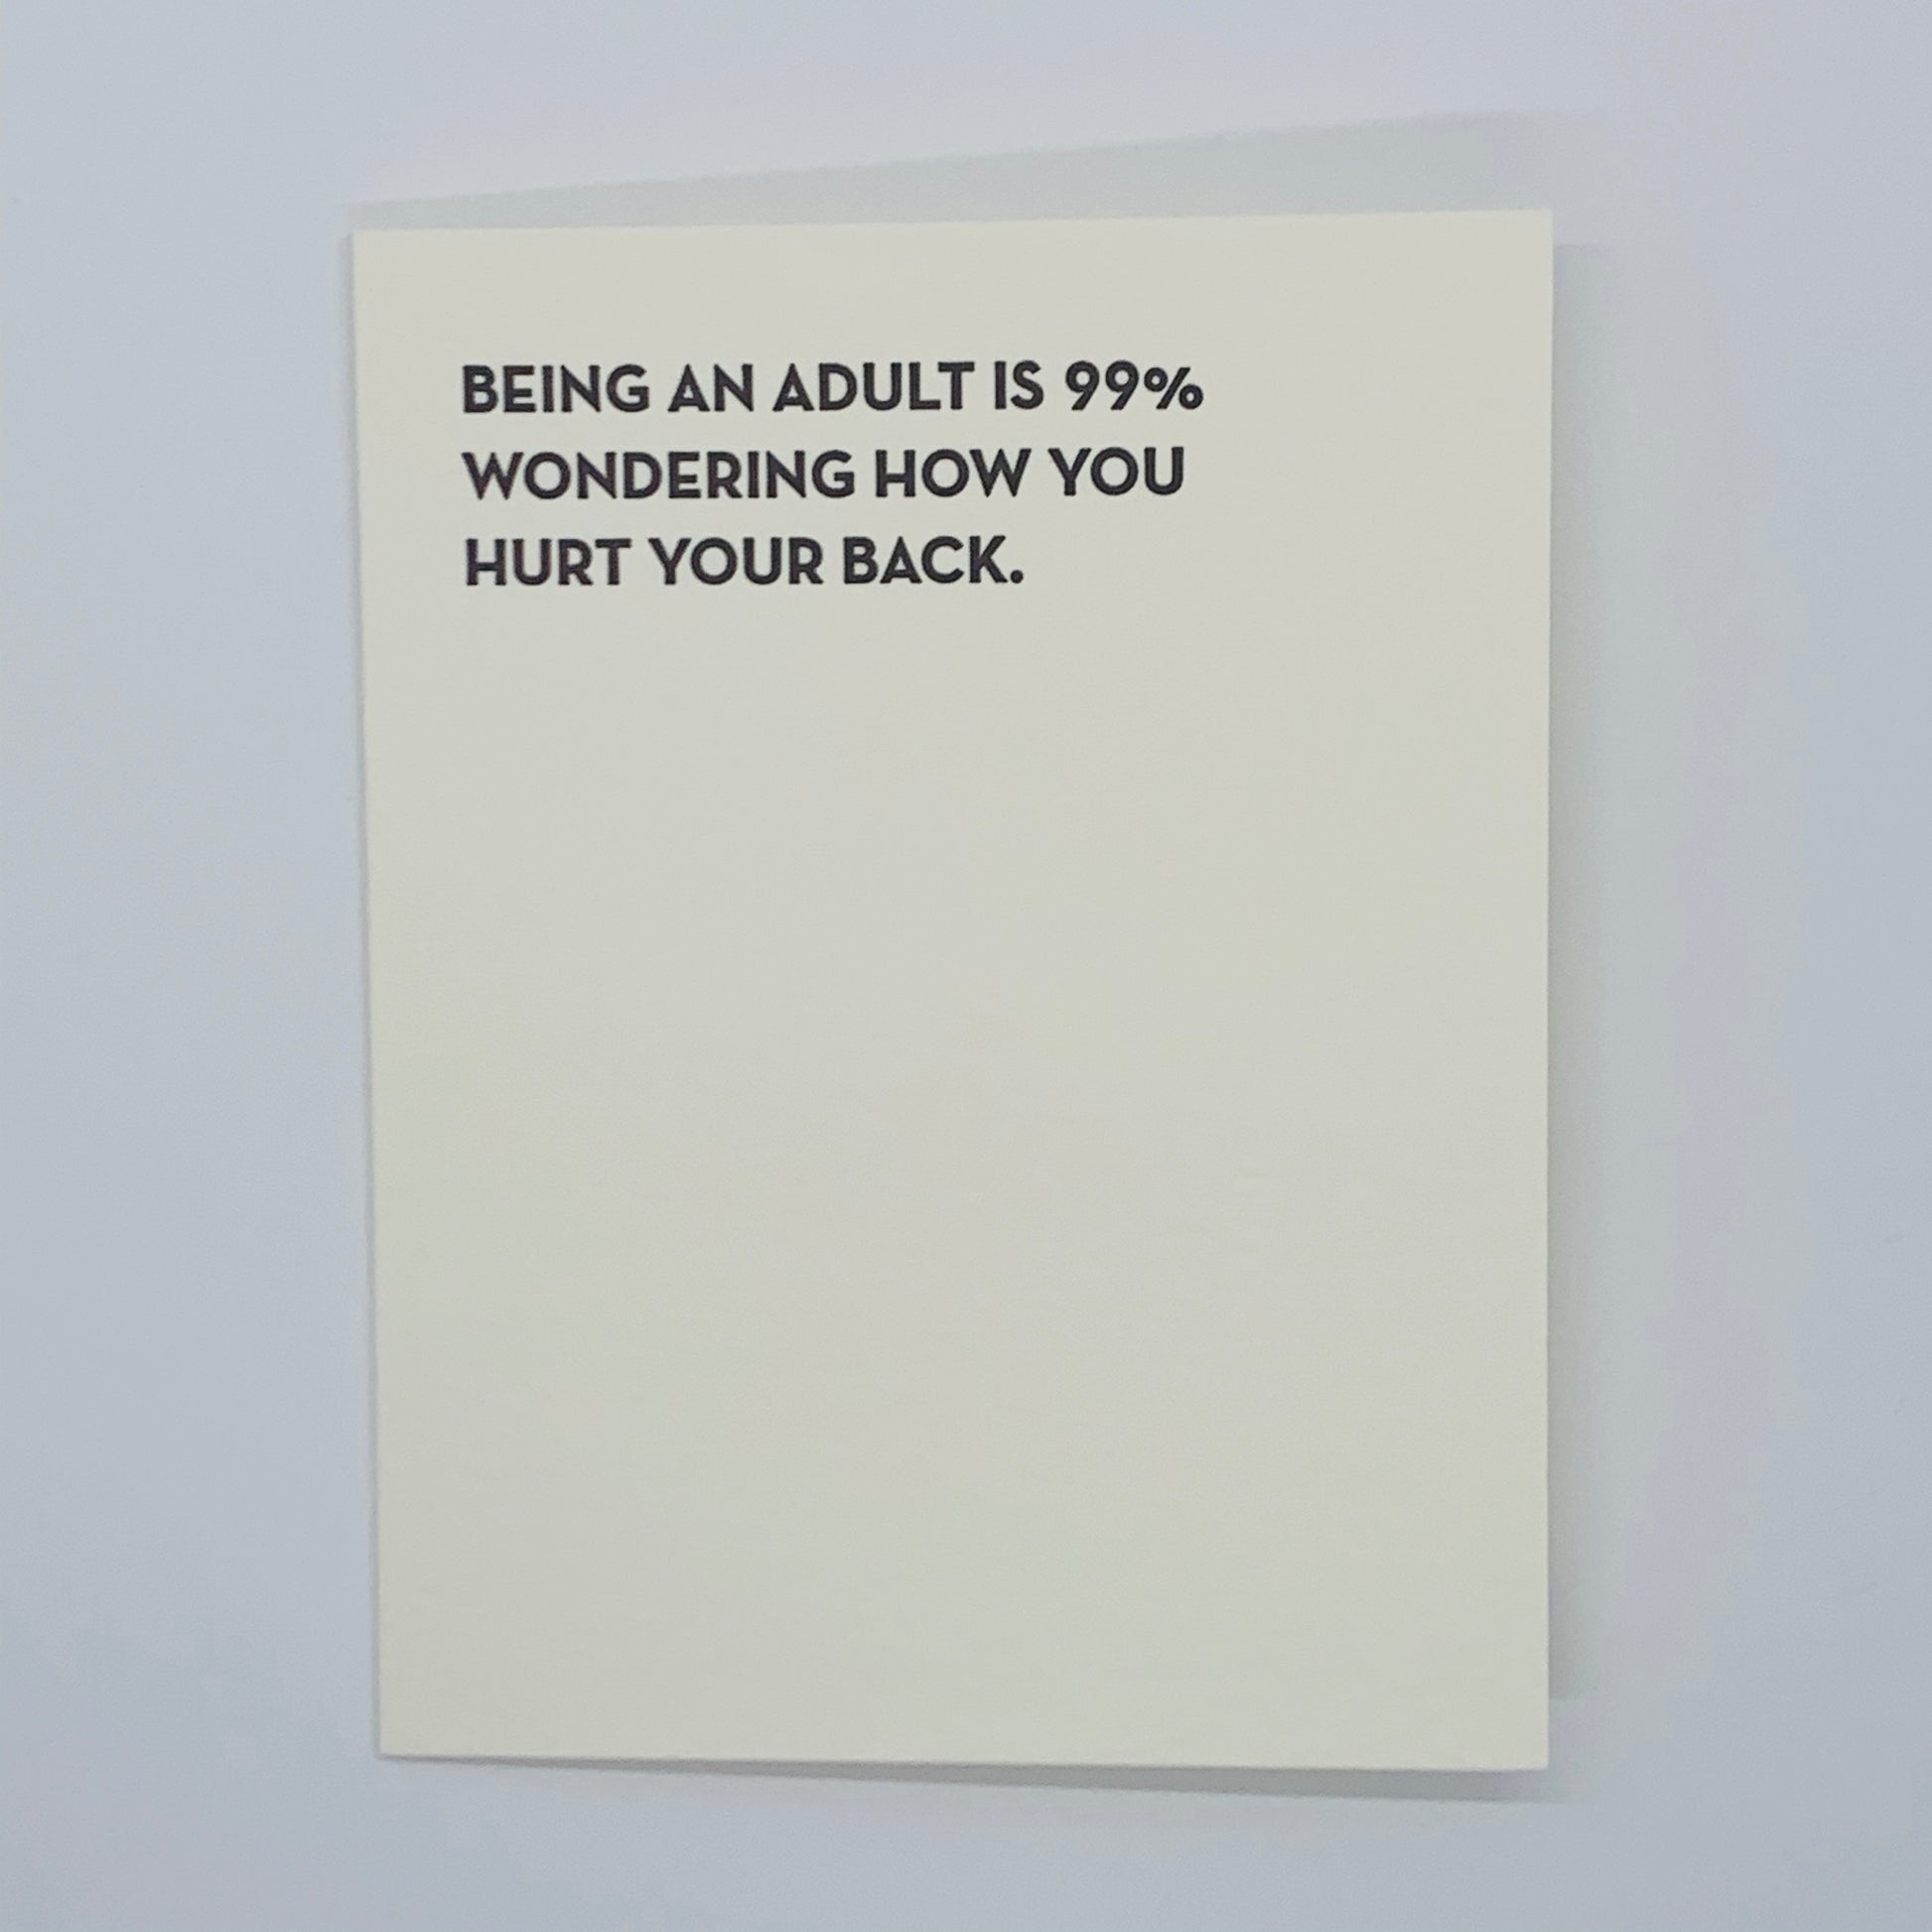 single card.  black text.  Being an adult is 99% wondering how you hurt your back